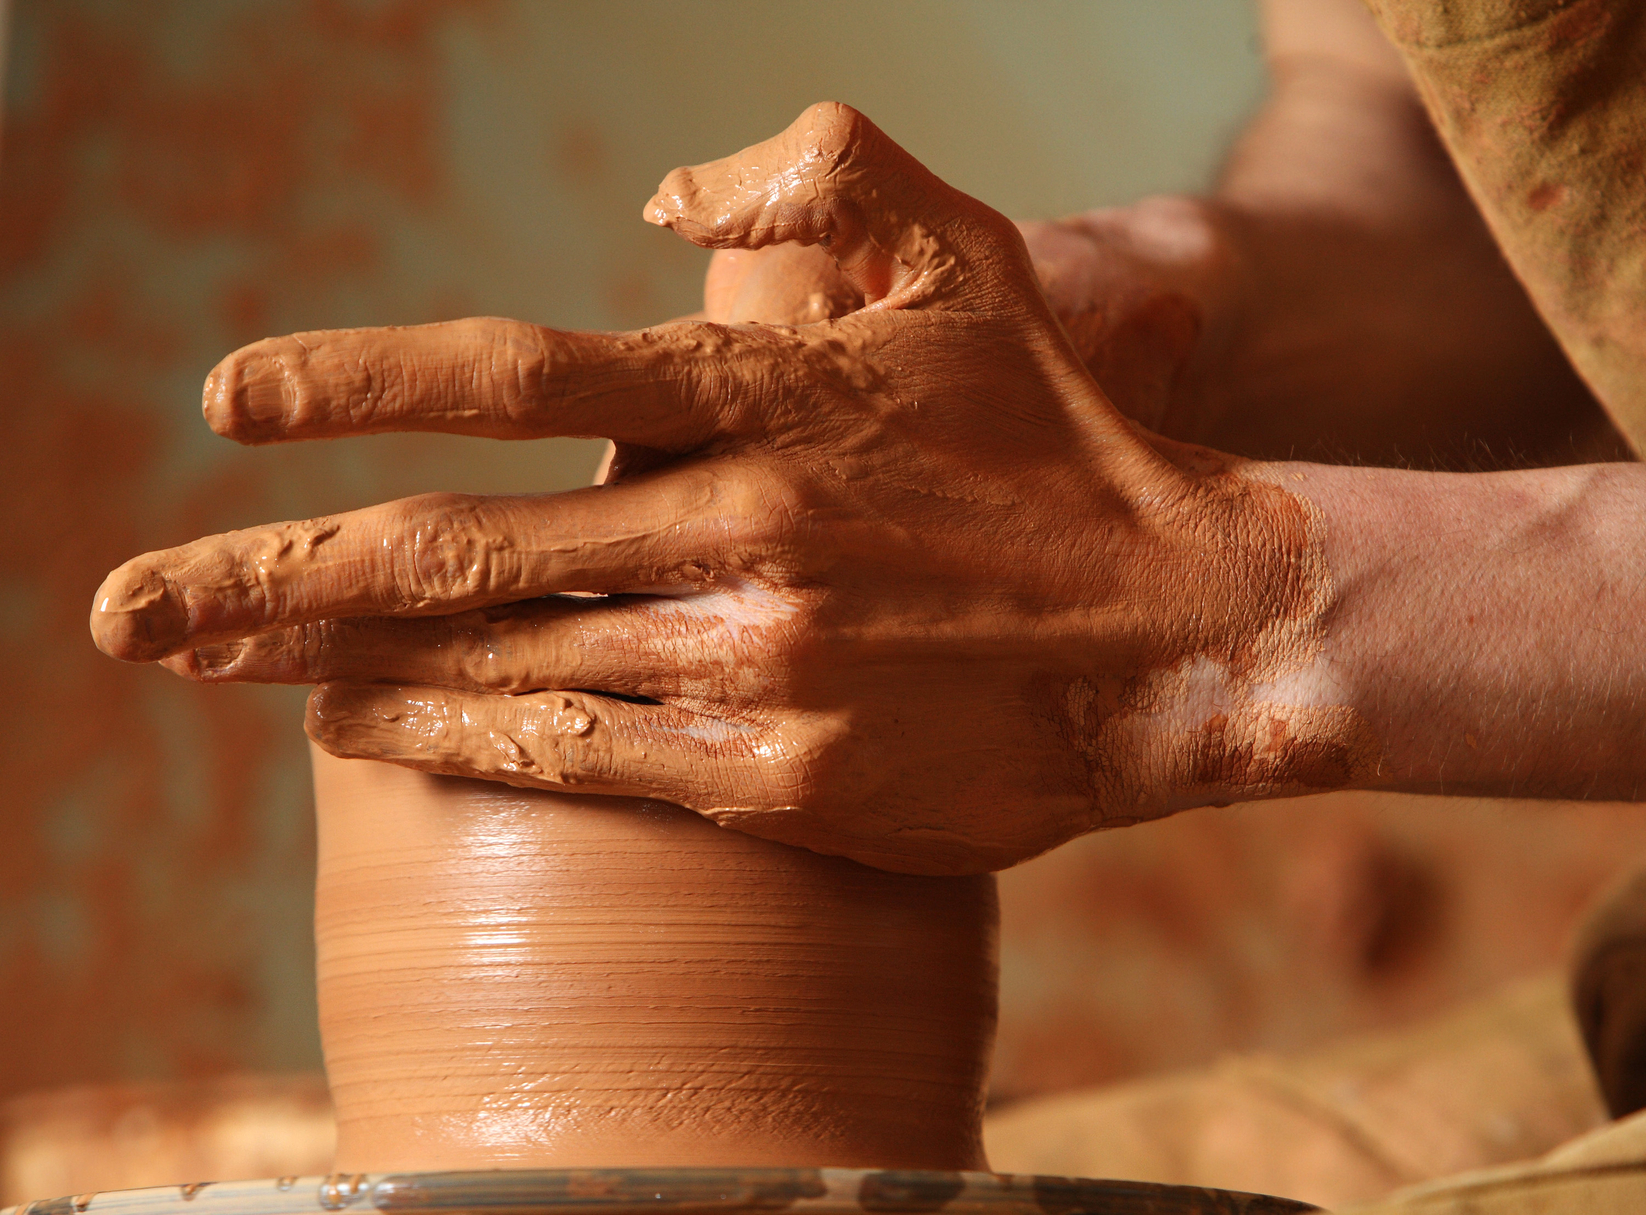 pottery, beauty, and redemptive hope